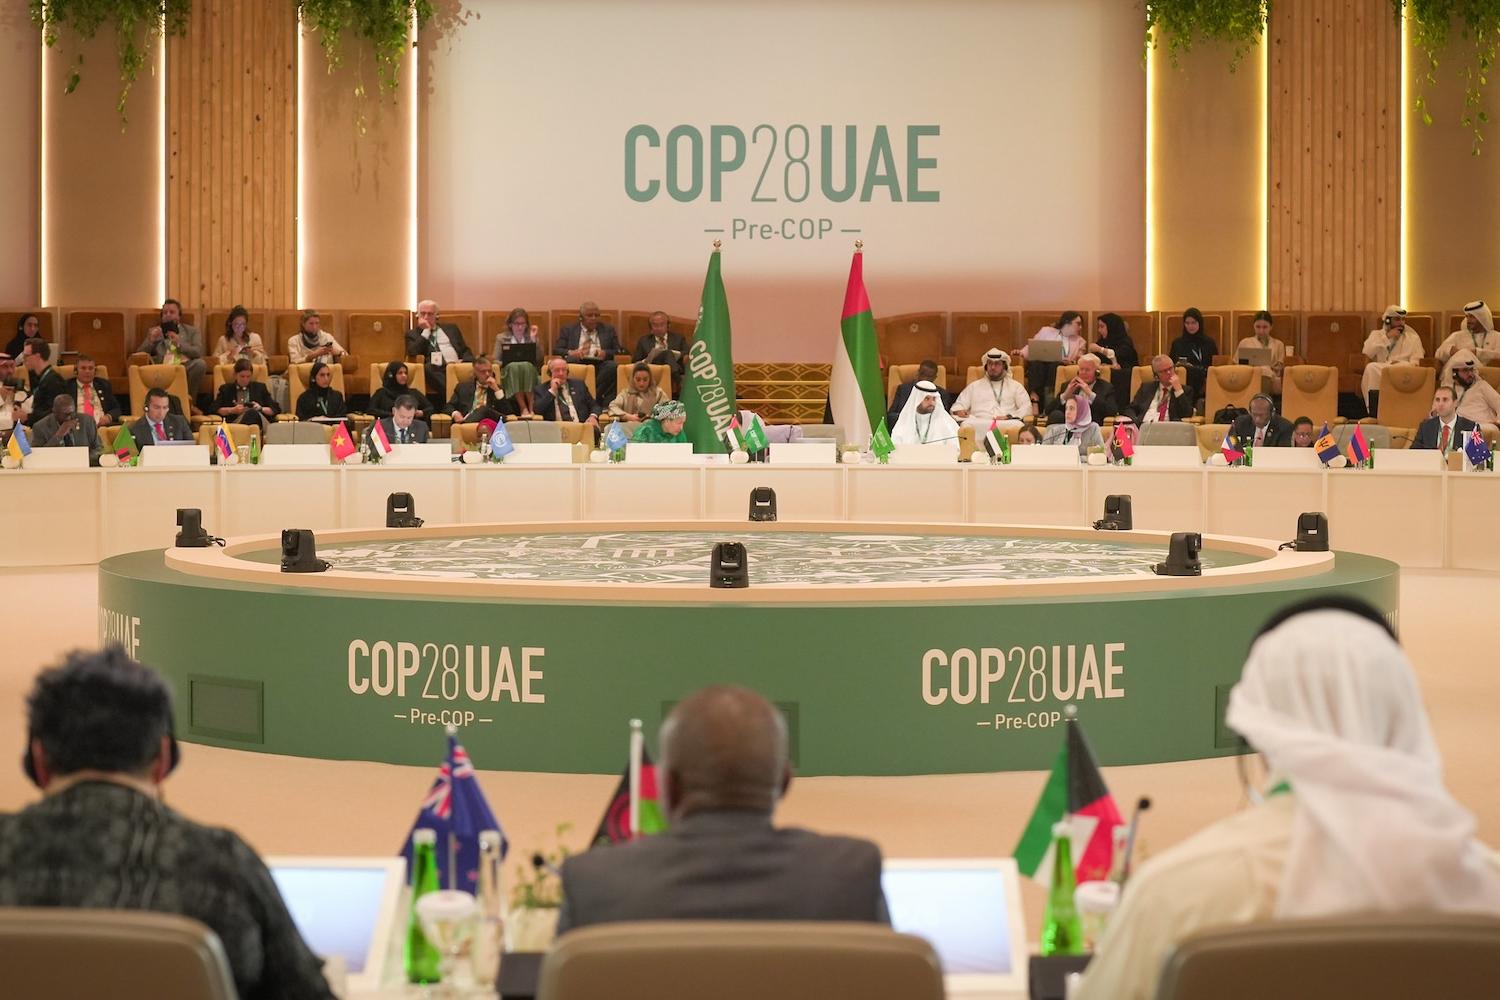 world leaders gather for a pre-cop plenary before cop28